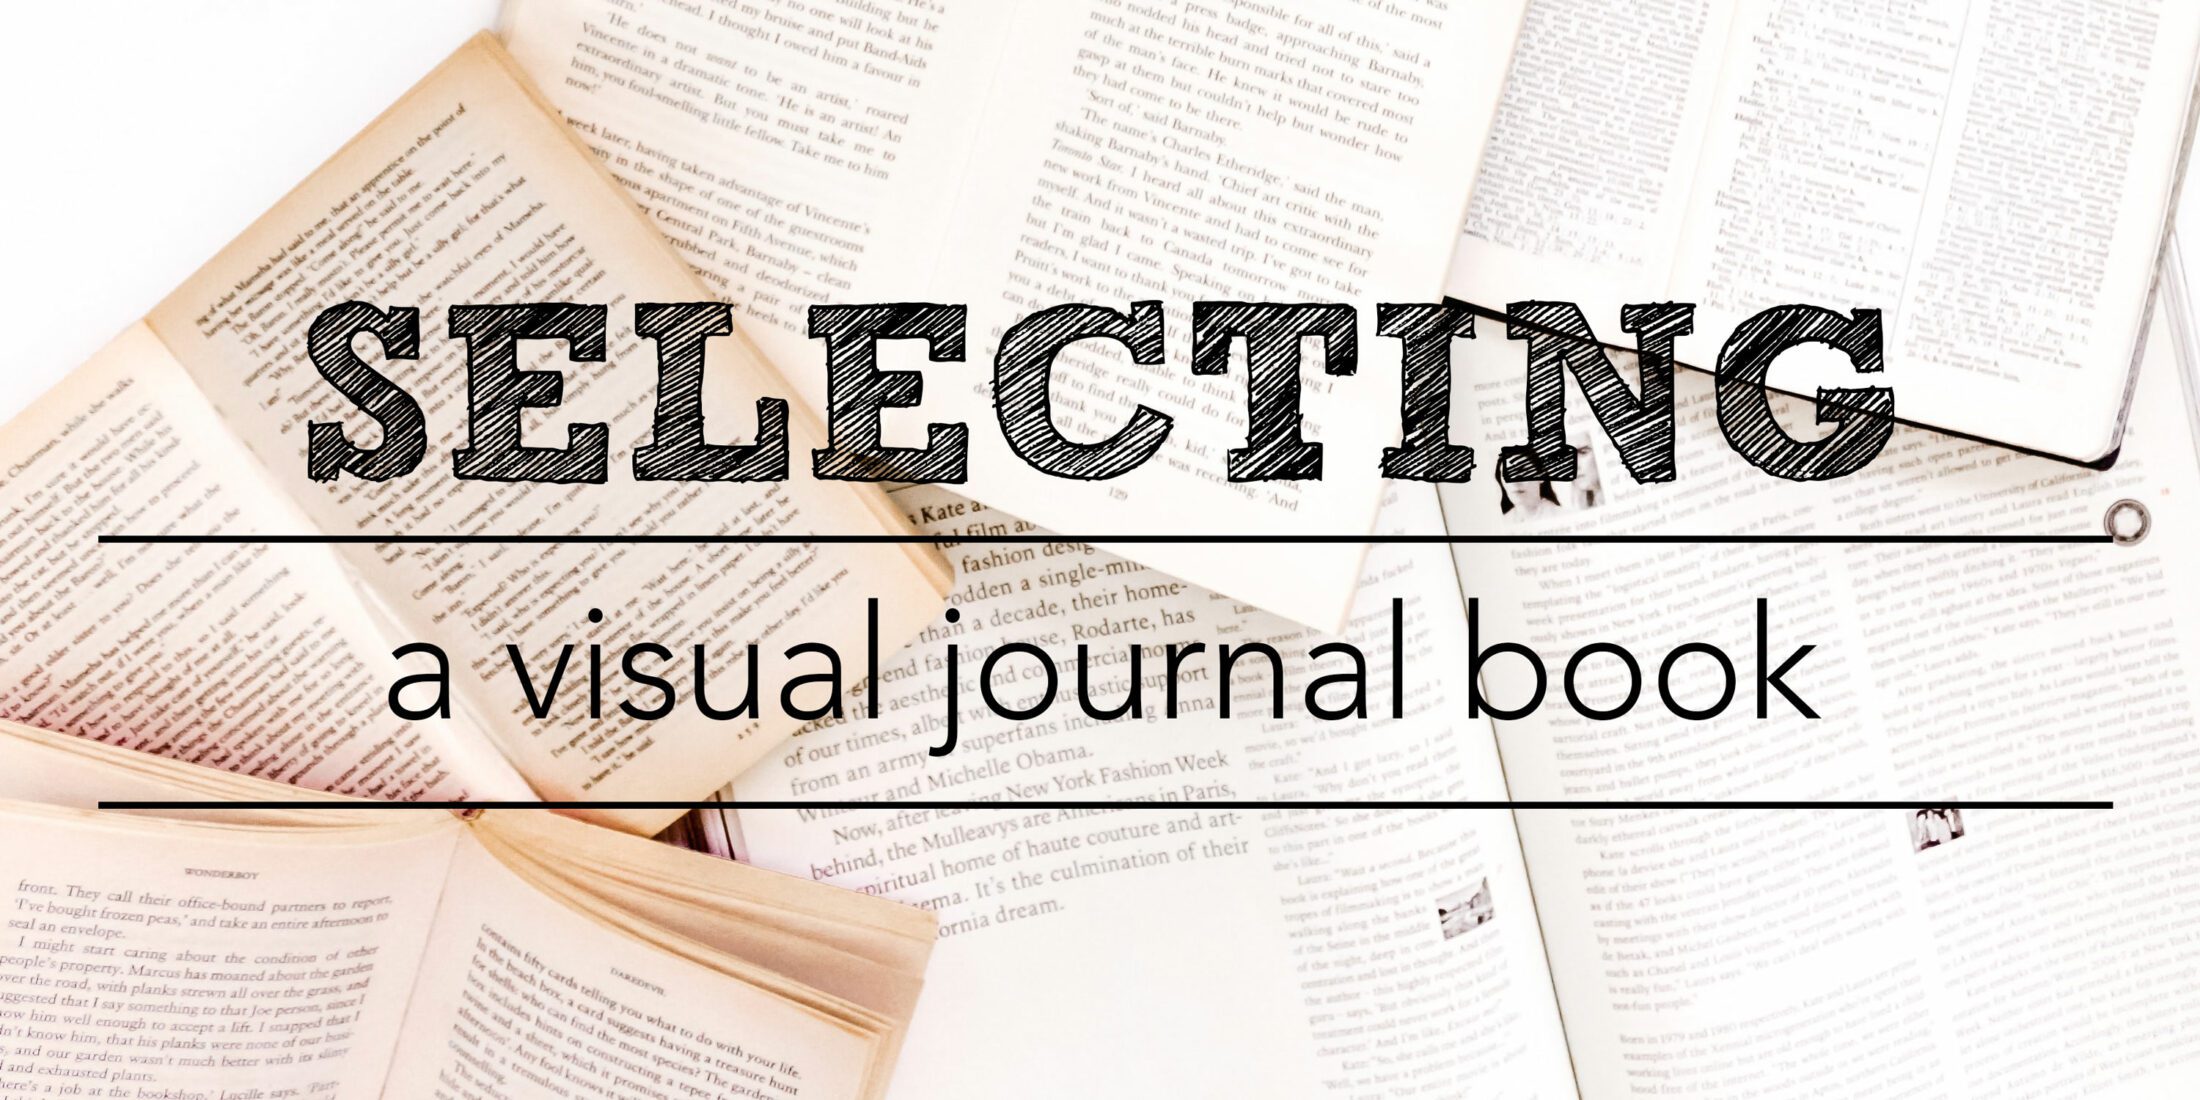 Selecting a visual journal book